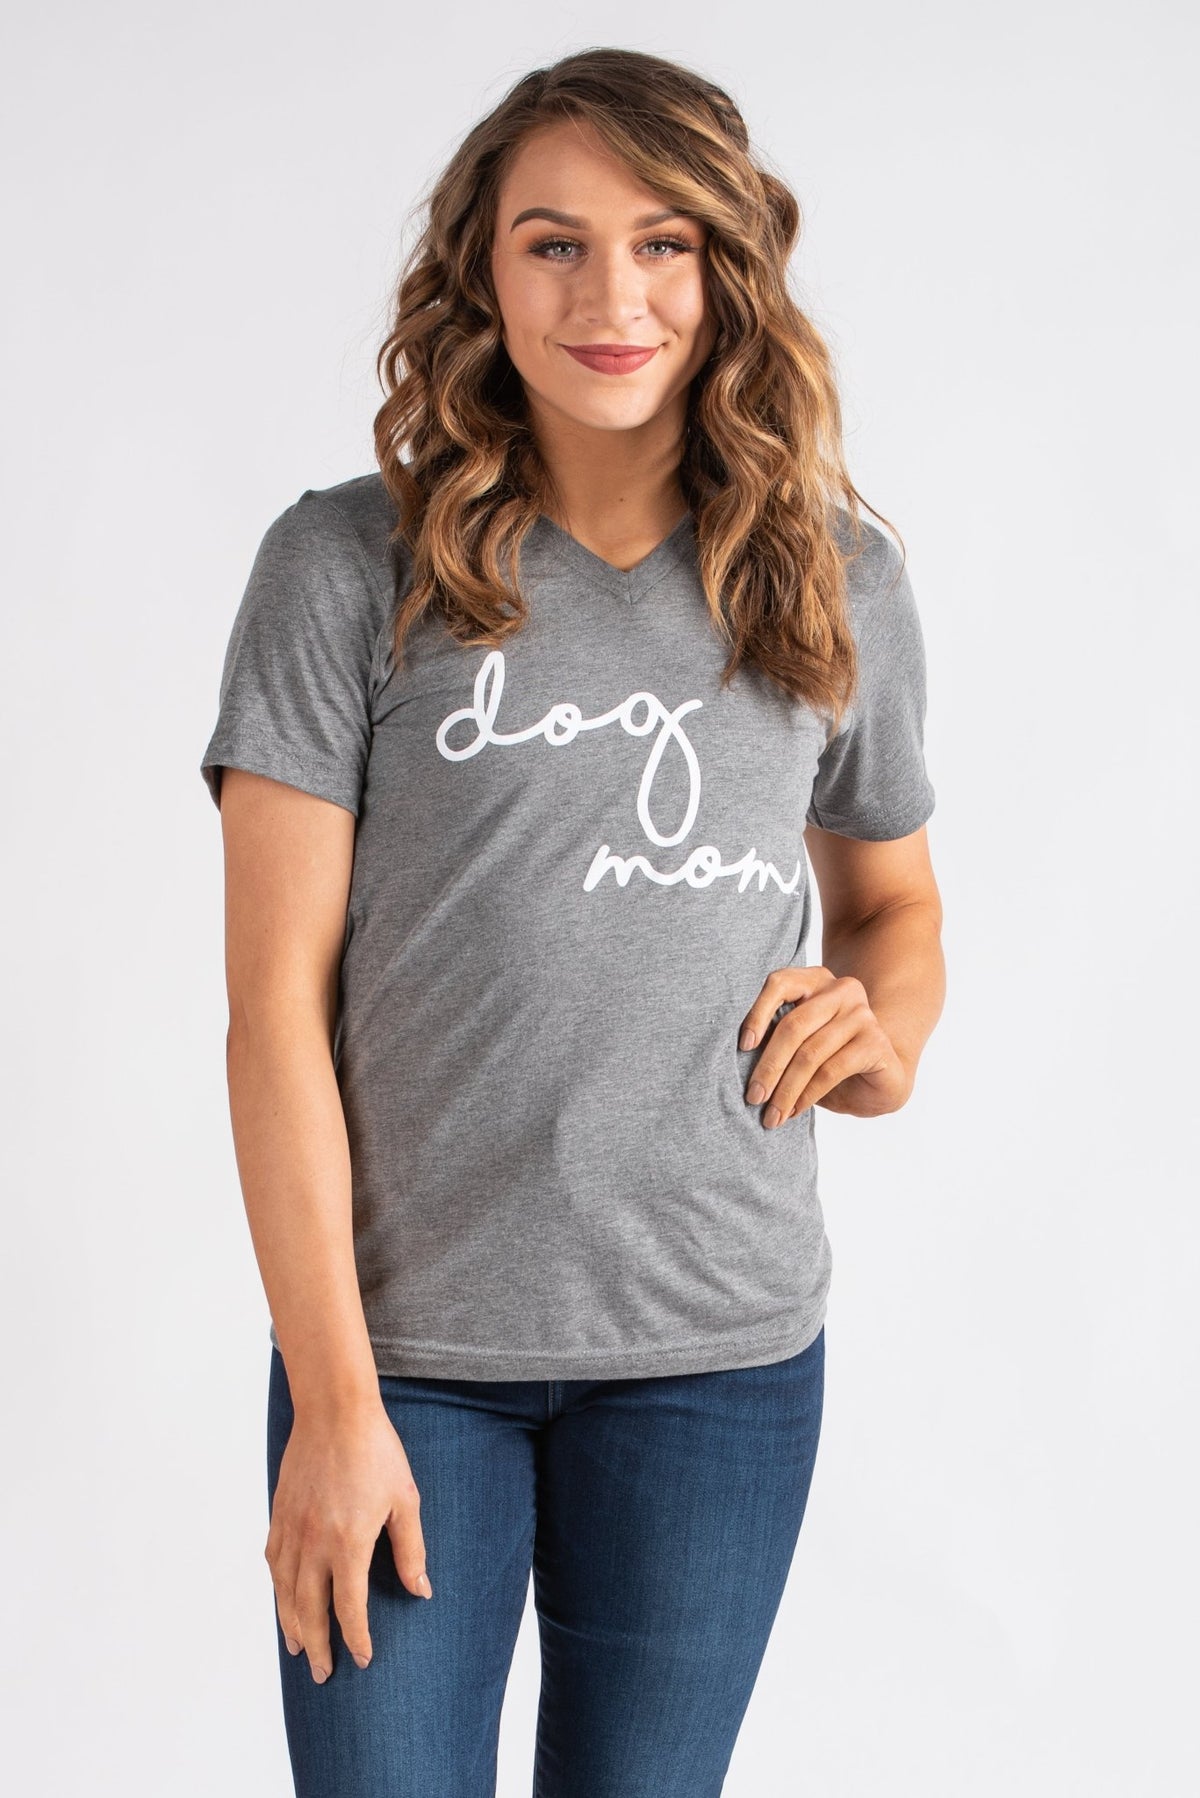 Dog Mom script unisex short sleeve v-neck t-shirt grey - Stylish Sweaters - Trendy Graphic T-Shirts and Tank Tops at Lush Fashion Lounge Boutique in Oklahoma City